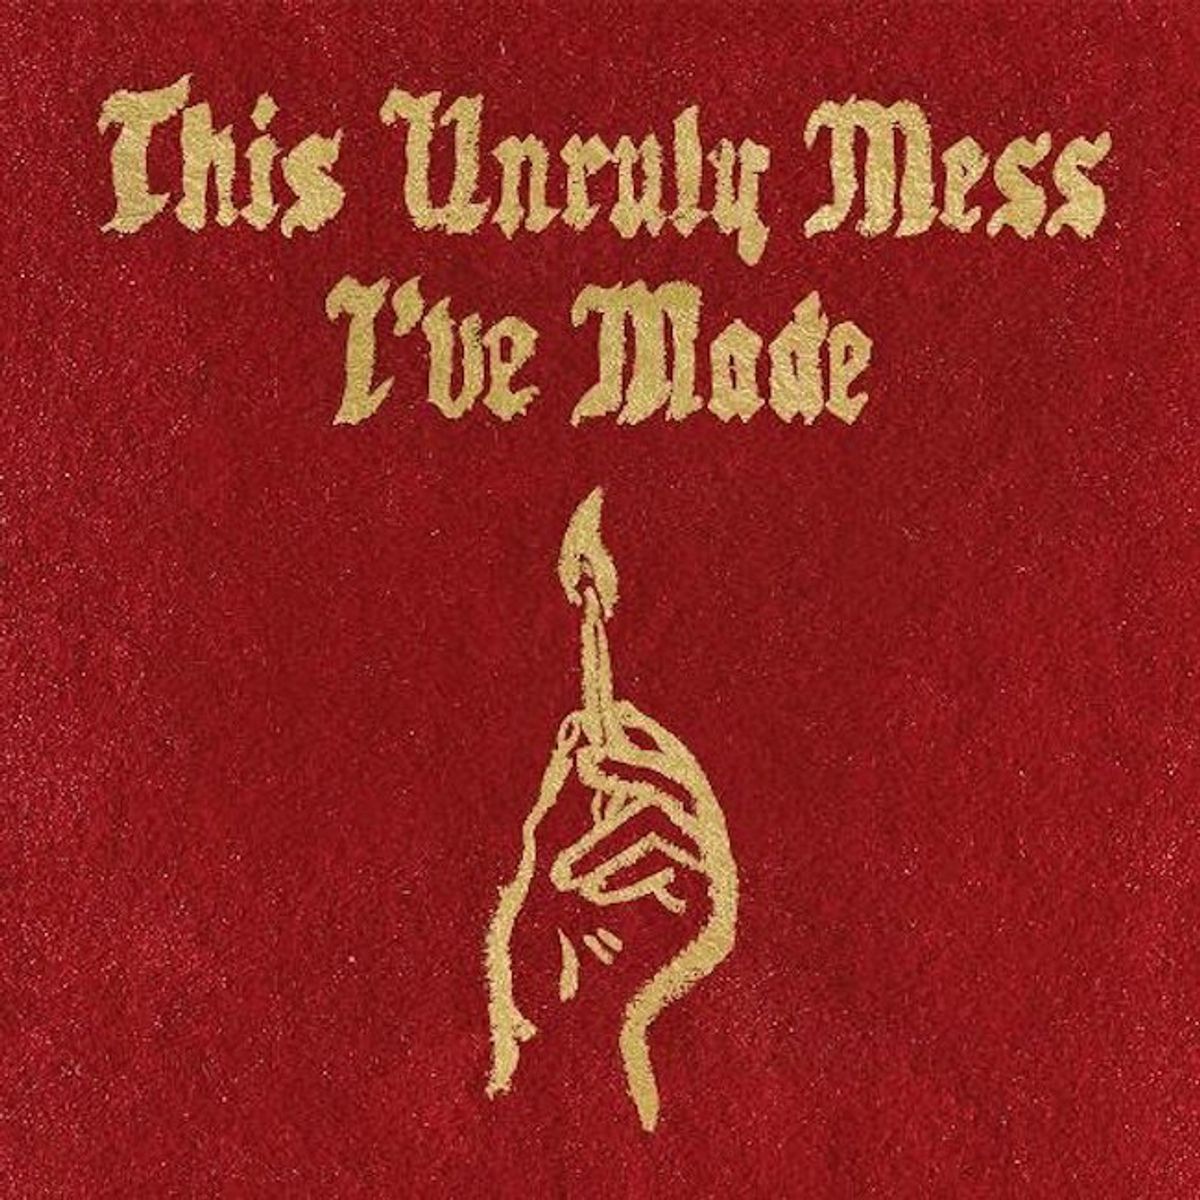 Macklemore & Ryan Lewis “This Unruly Mess I’ve Made” Review